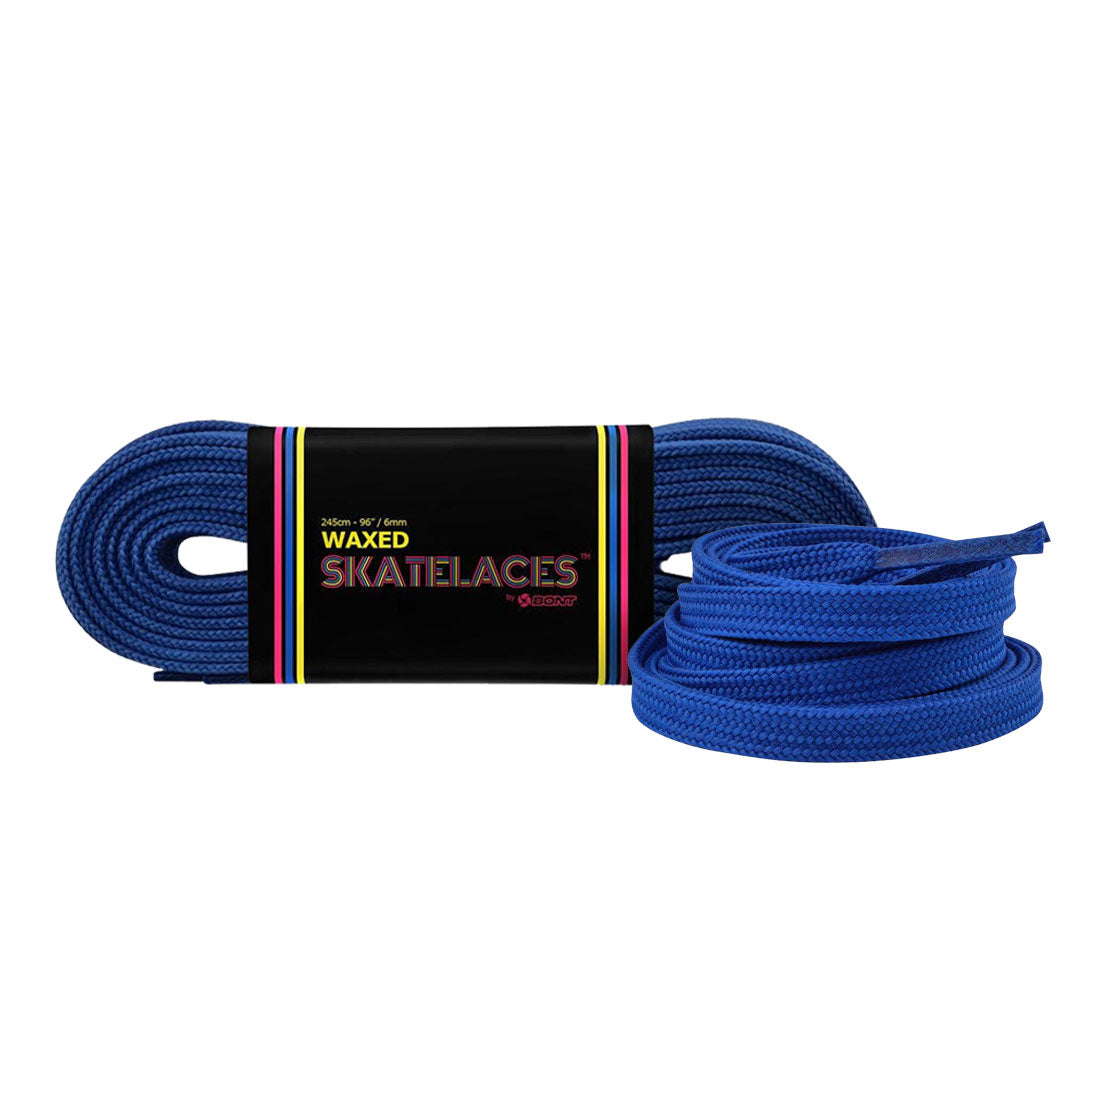 Bont Waxed 6mm Laces - 200cm/79in Mad About You Blue Laces